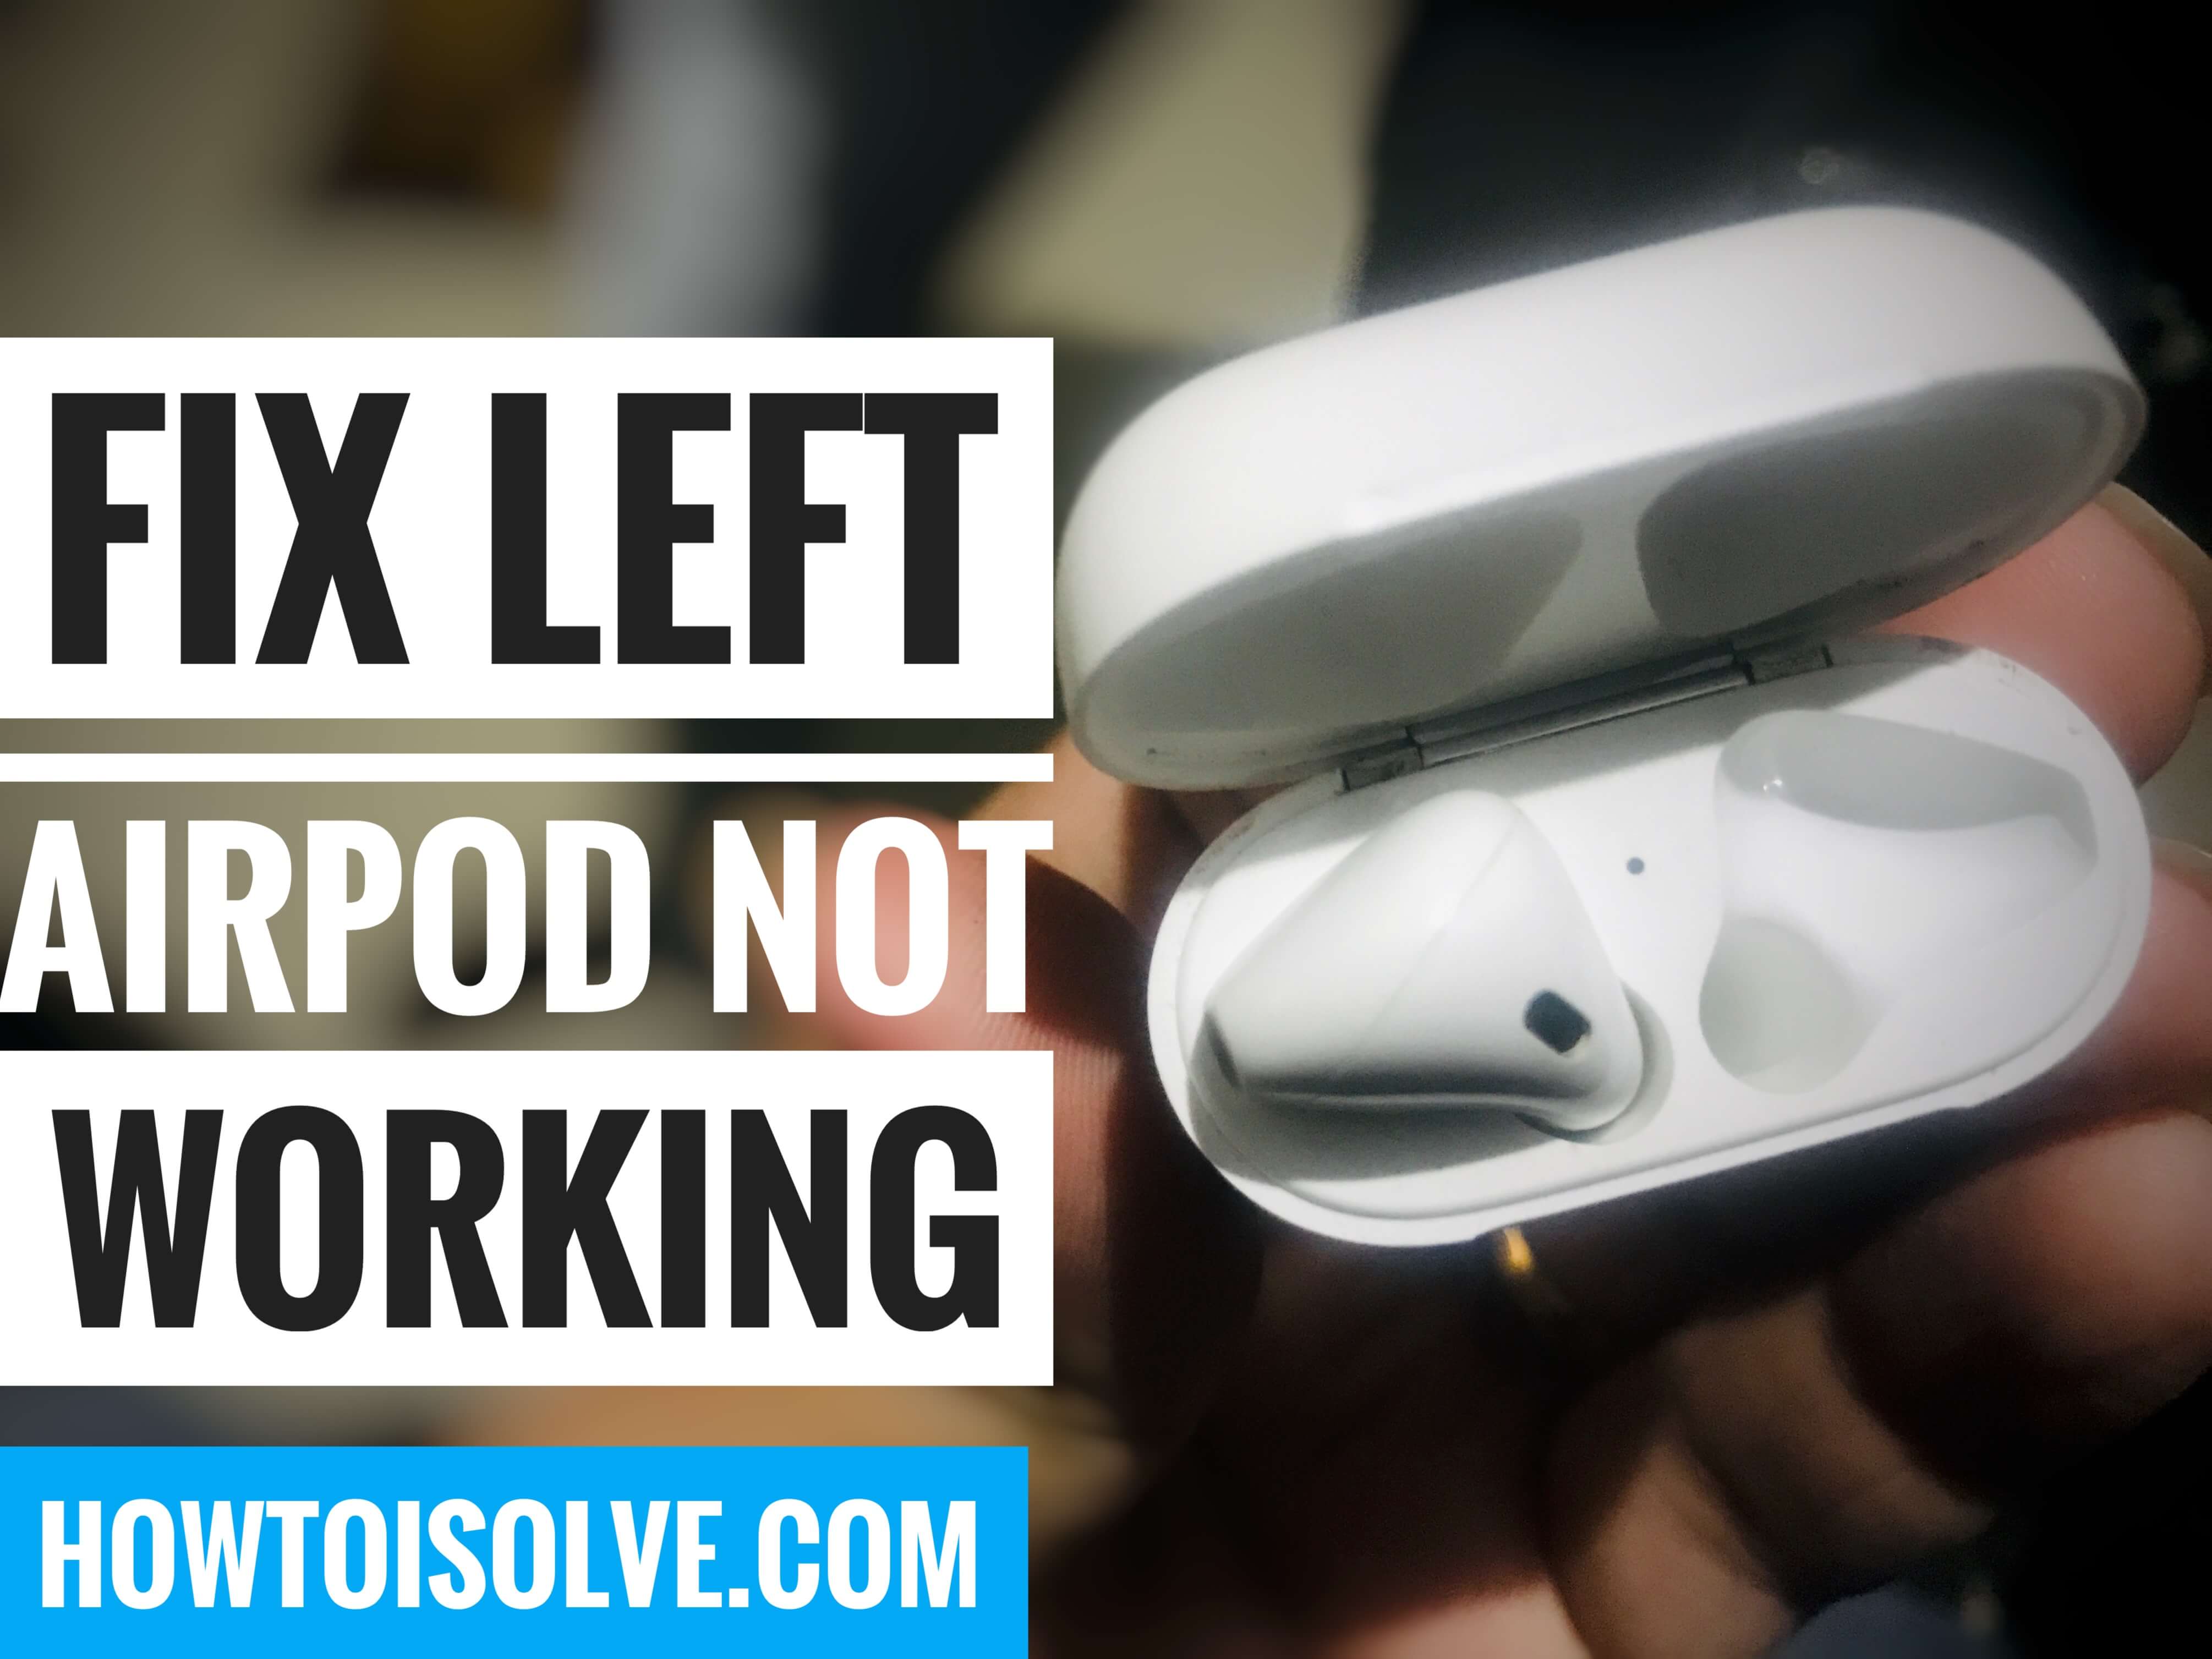 13 Fixes Right/Left Airpod Not Working Properly- Only Playing in One Ear - Airpods Pro Only Playing In One Ear